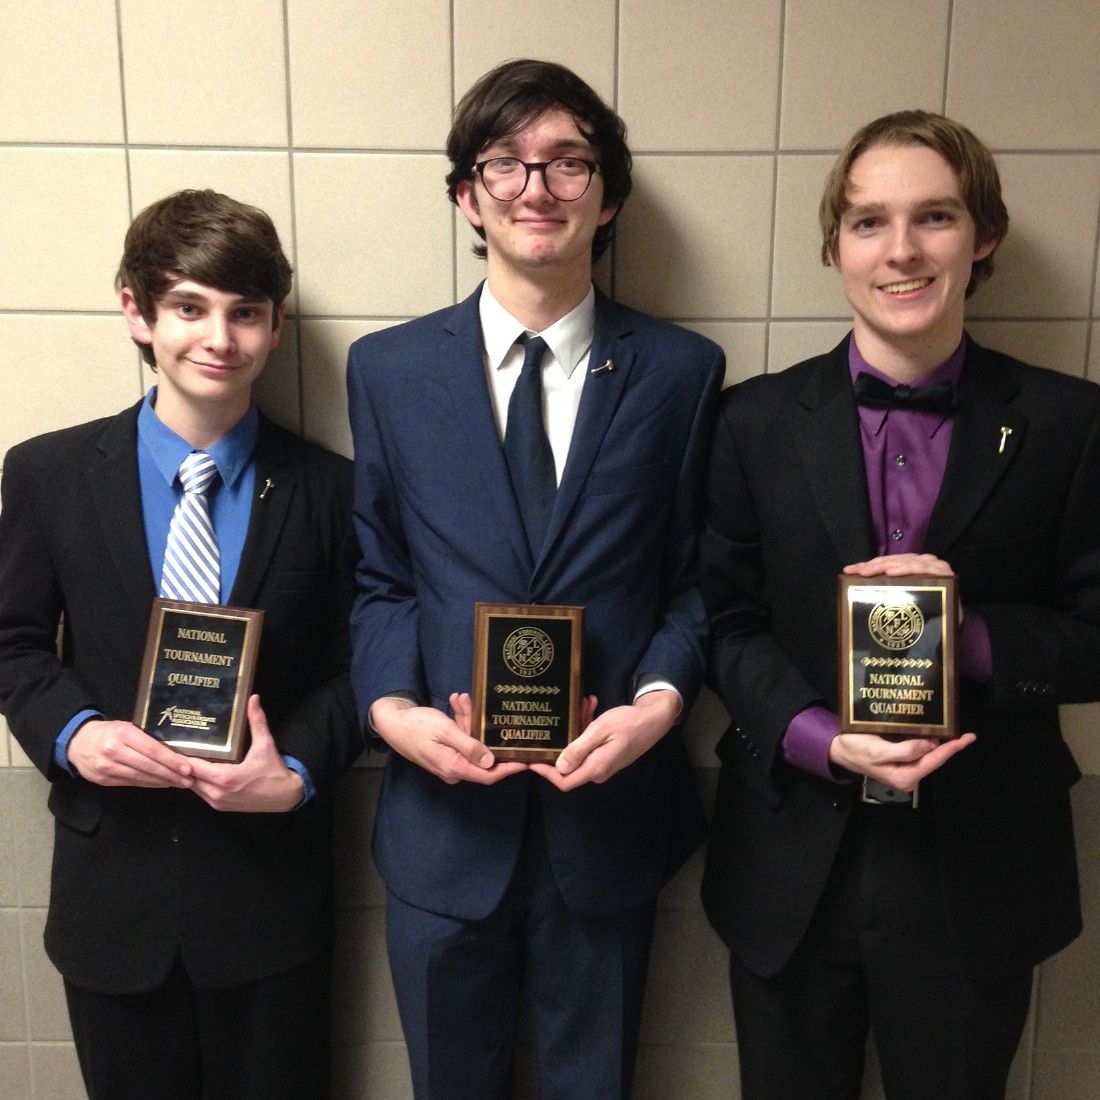 Twelve ISD Students Qualify for National Speech and Debate Tournament